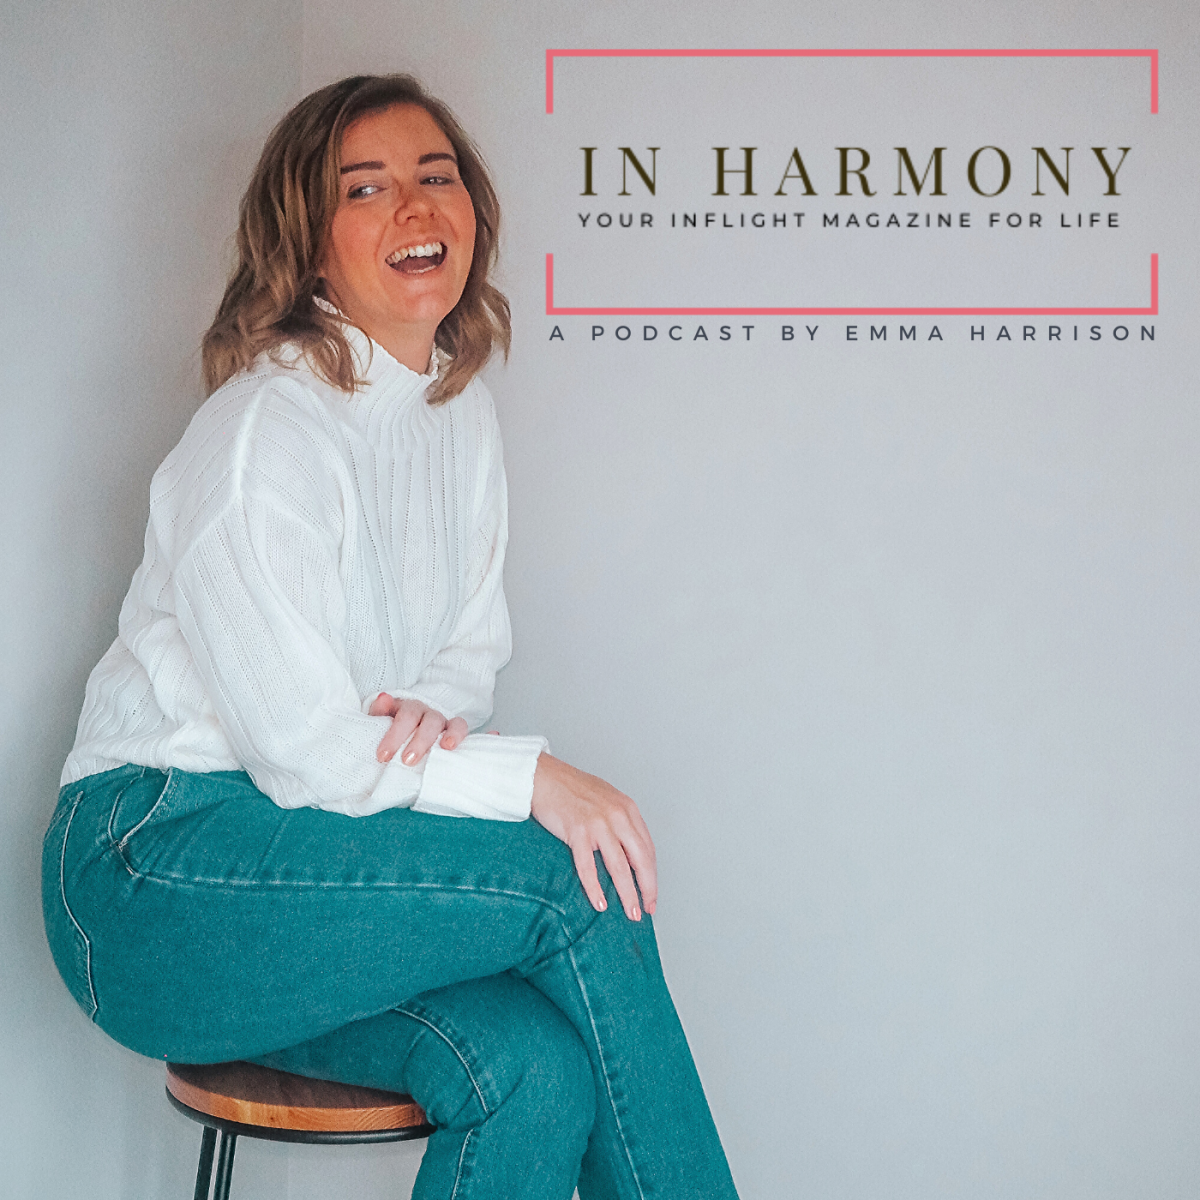 Have you heard the #InHarmony podcast yet? With series two in the pipeline theres never been a better time to catch up... bit.ly/34cHI5s @bloggeroppsrt @TEAANDPOST @BBlogRT #BBlogRT @bloglove2018 #bloglove2018 @BloggersSparkle #BloggersSparkle #thebloggershub #blogger